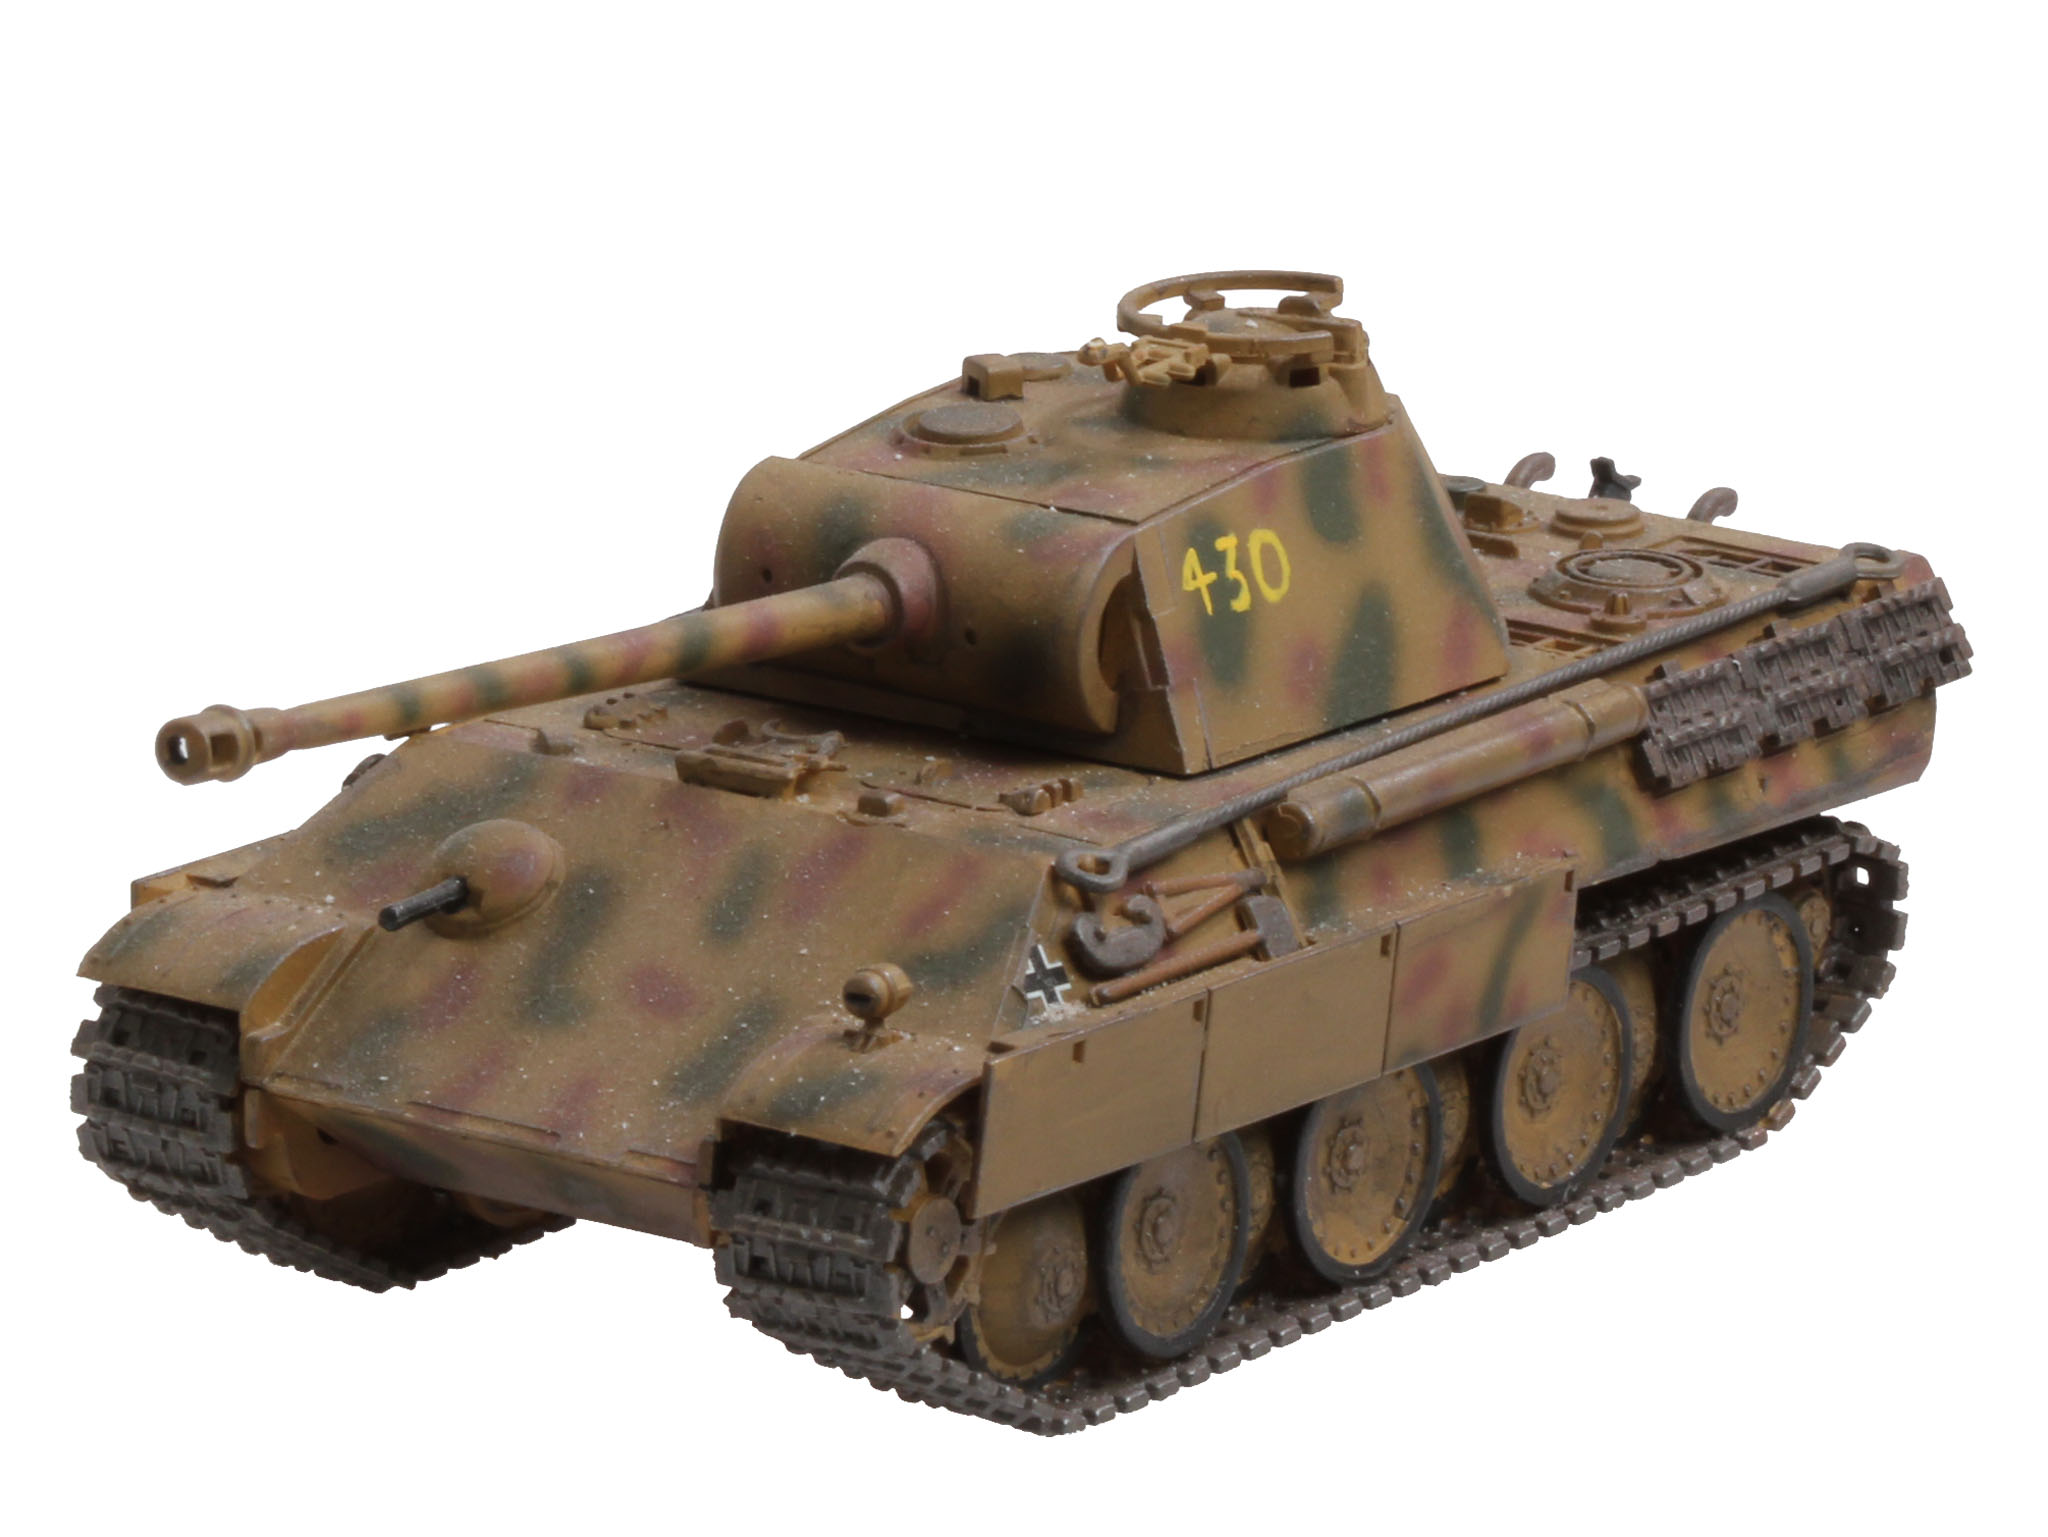 Kpfw. V Panther Ausf - PzKpfw V PANTHER Ausf.G (Sd.Kfz. 171) 1:72